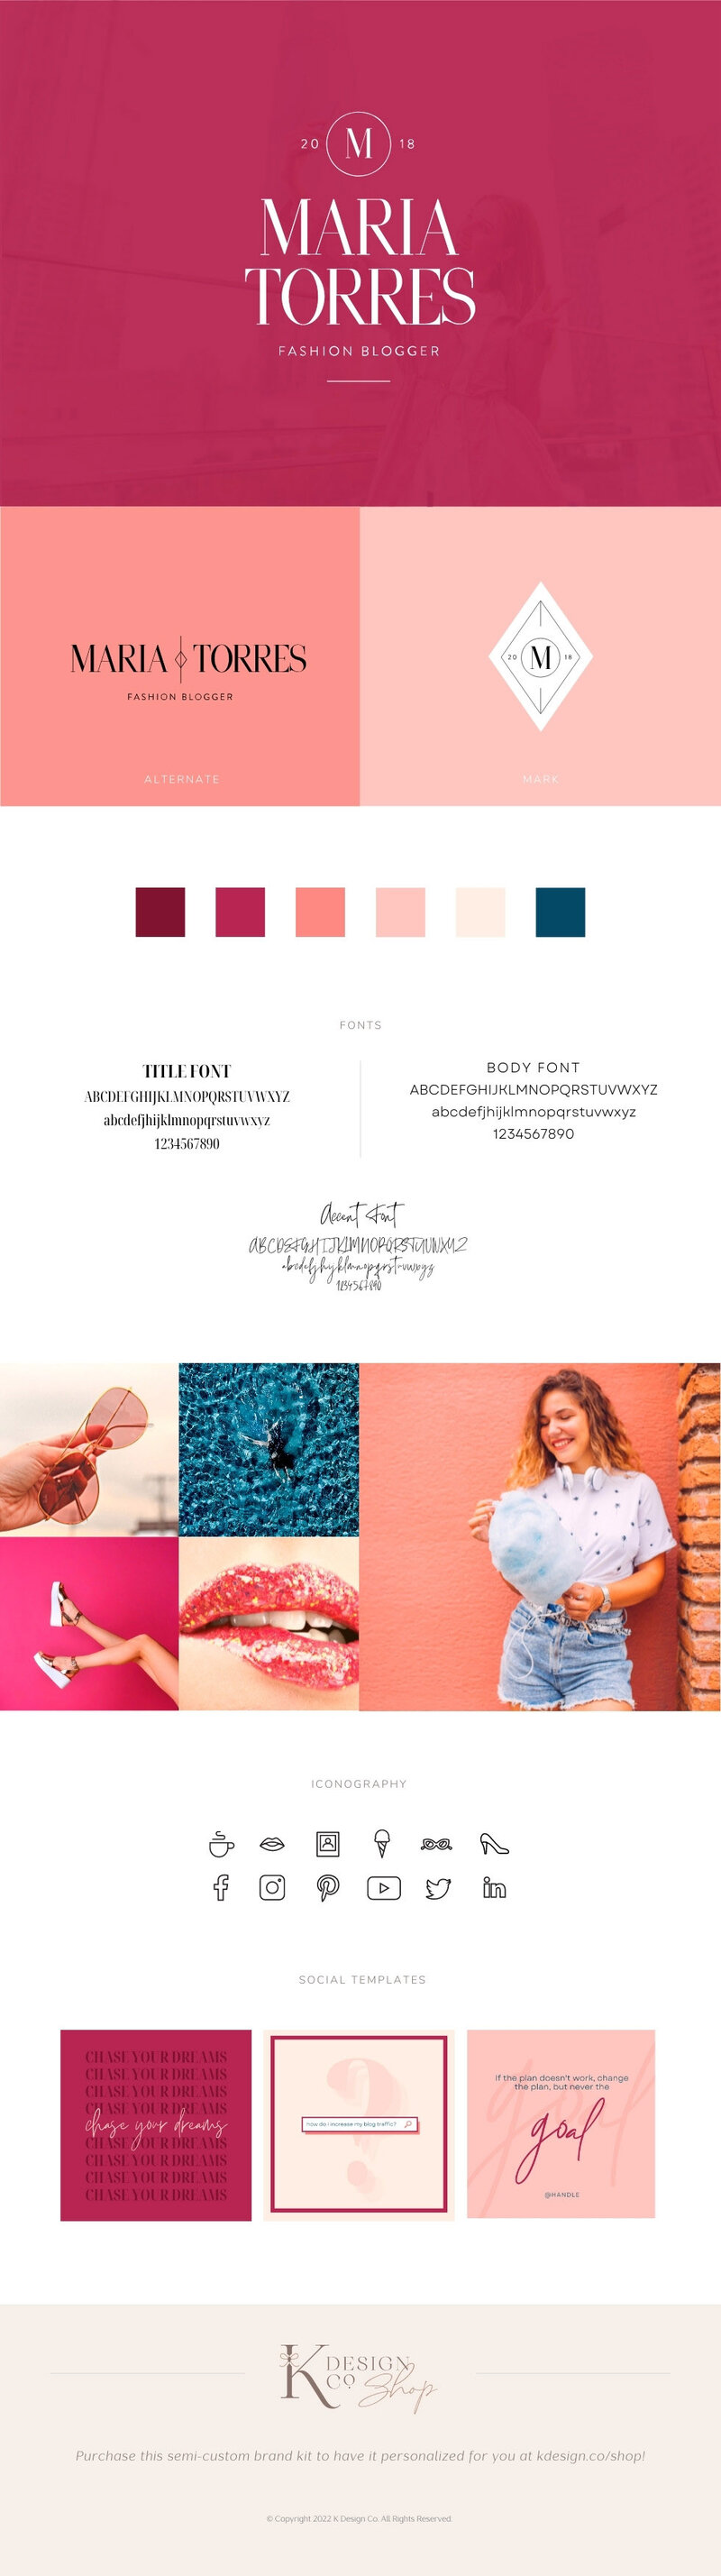 Blog logo design and brand kit with moodboard, social media templates, icons, color palette, font suggestions and inspirational images